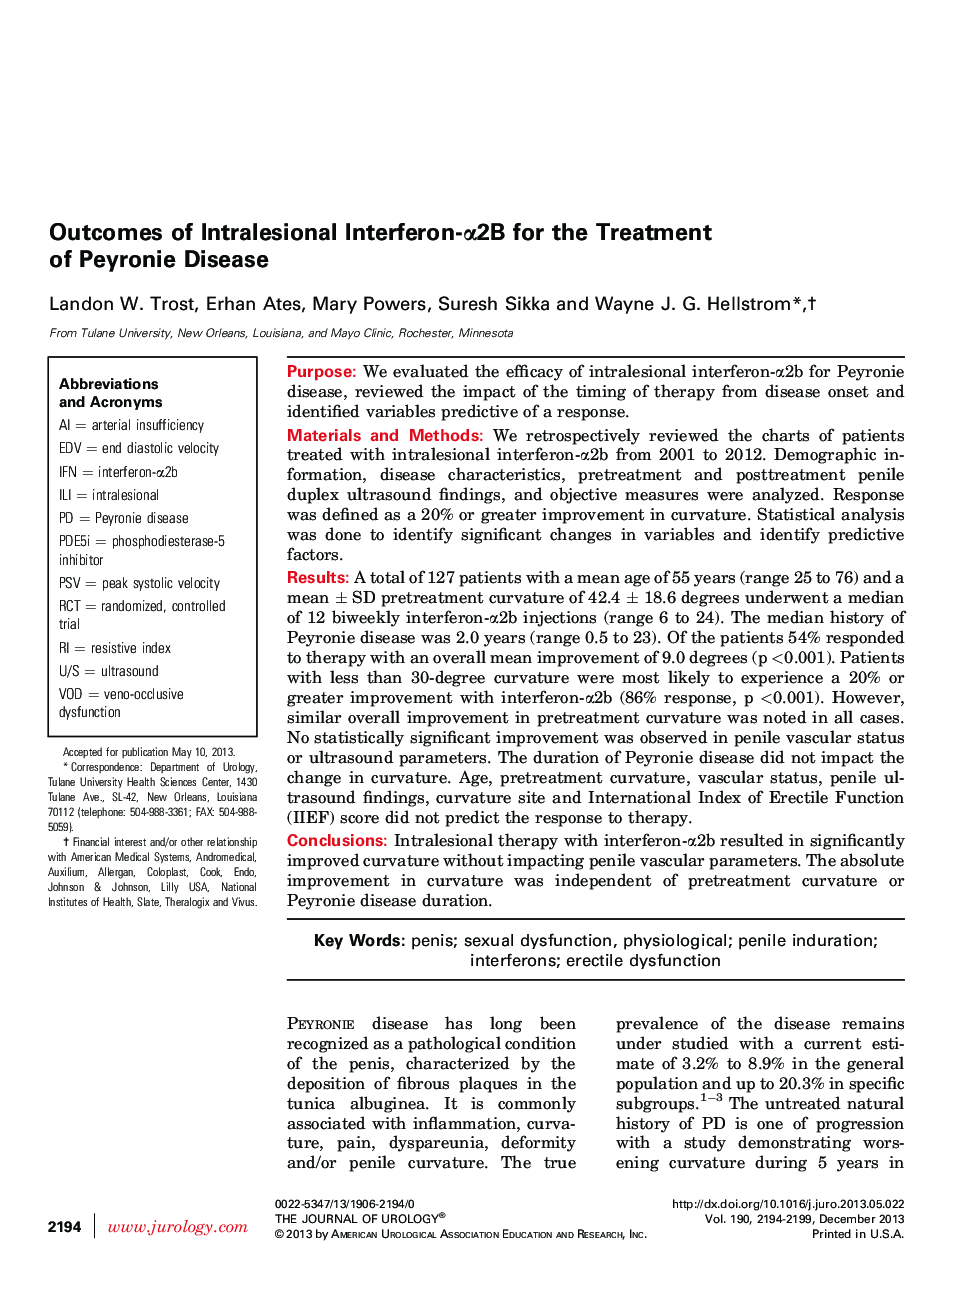 Outcomes of Intralesional Interferon-α2B for the Treatment of Peyronie Disease